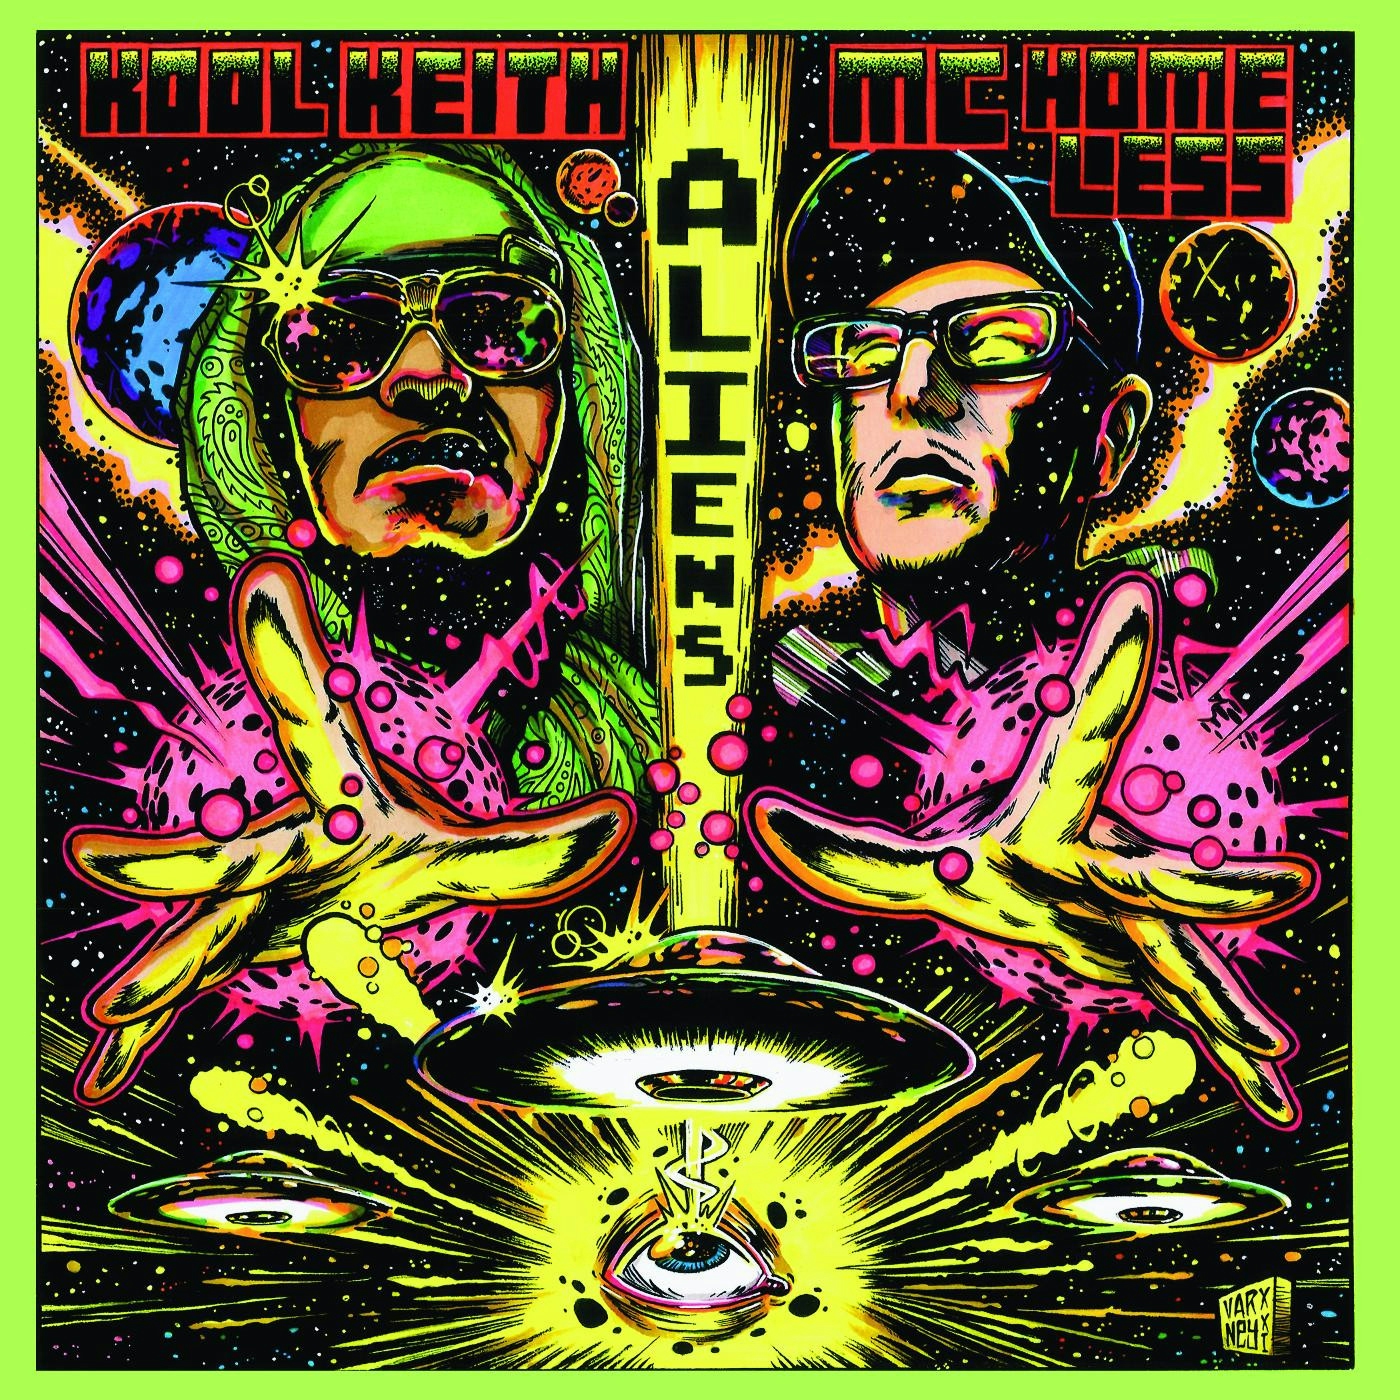 Album artwork for Album artwork for Aliens by Kool Keith and MC Homeless by Aliens - Kool Keith and MC Homeless